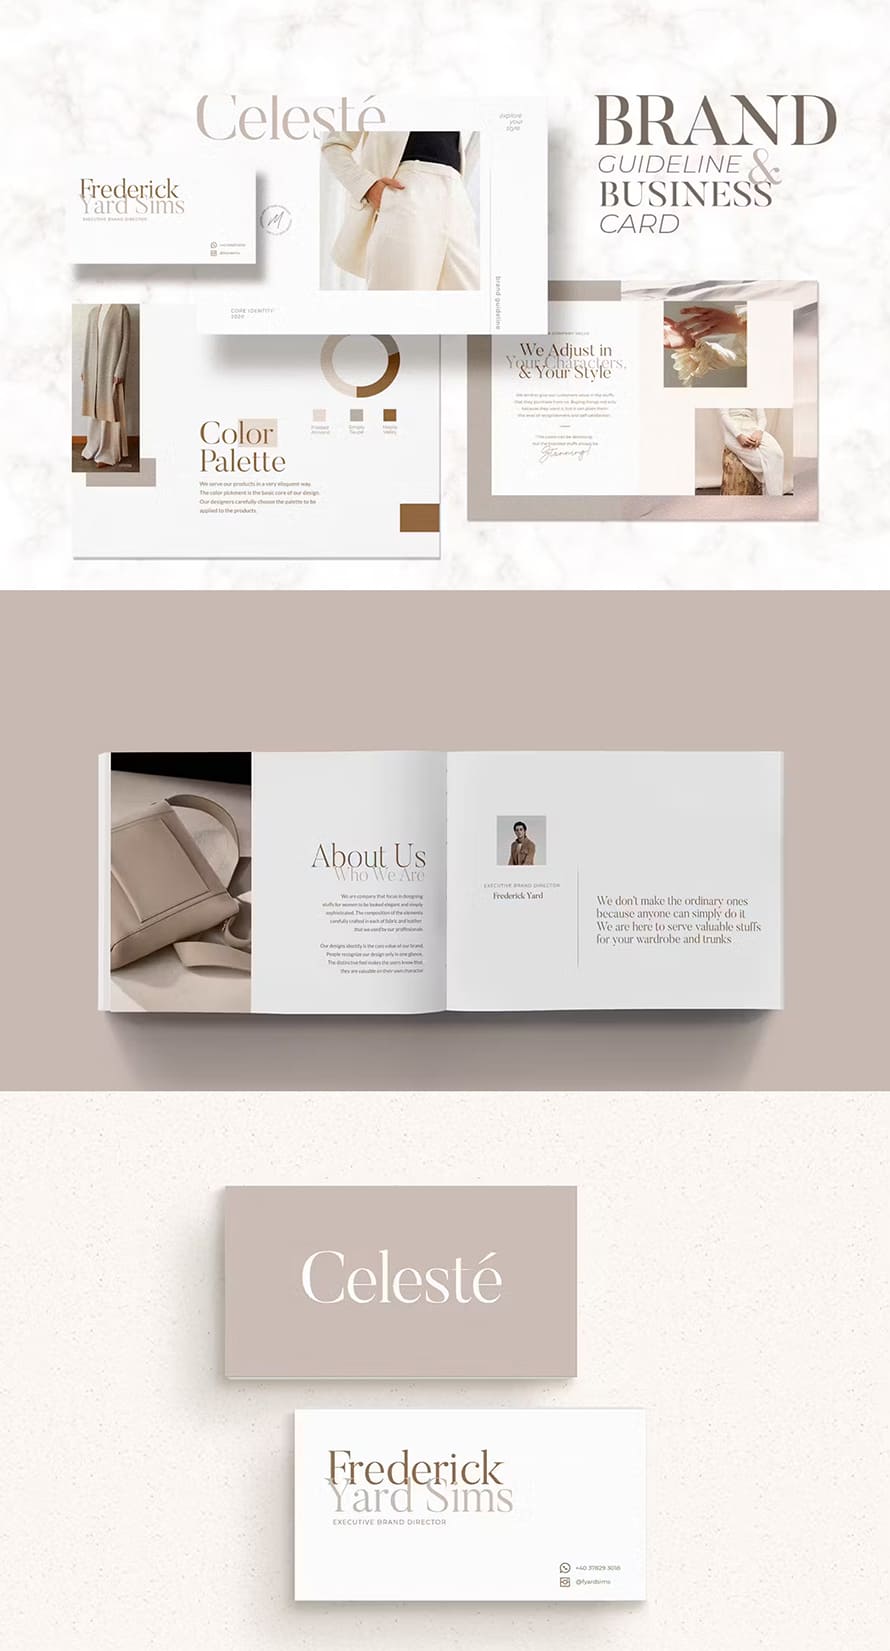 Brand Guideline And Business Card Celeste